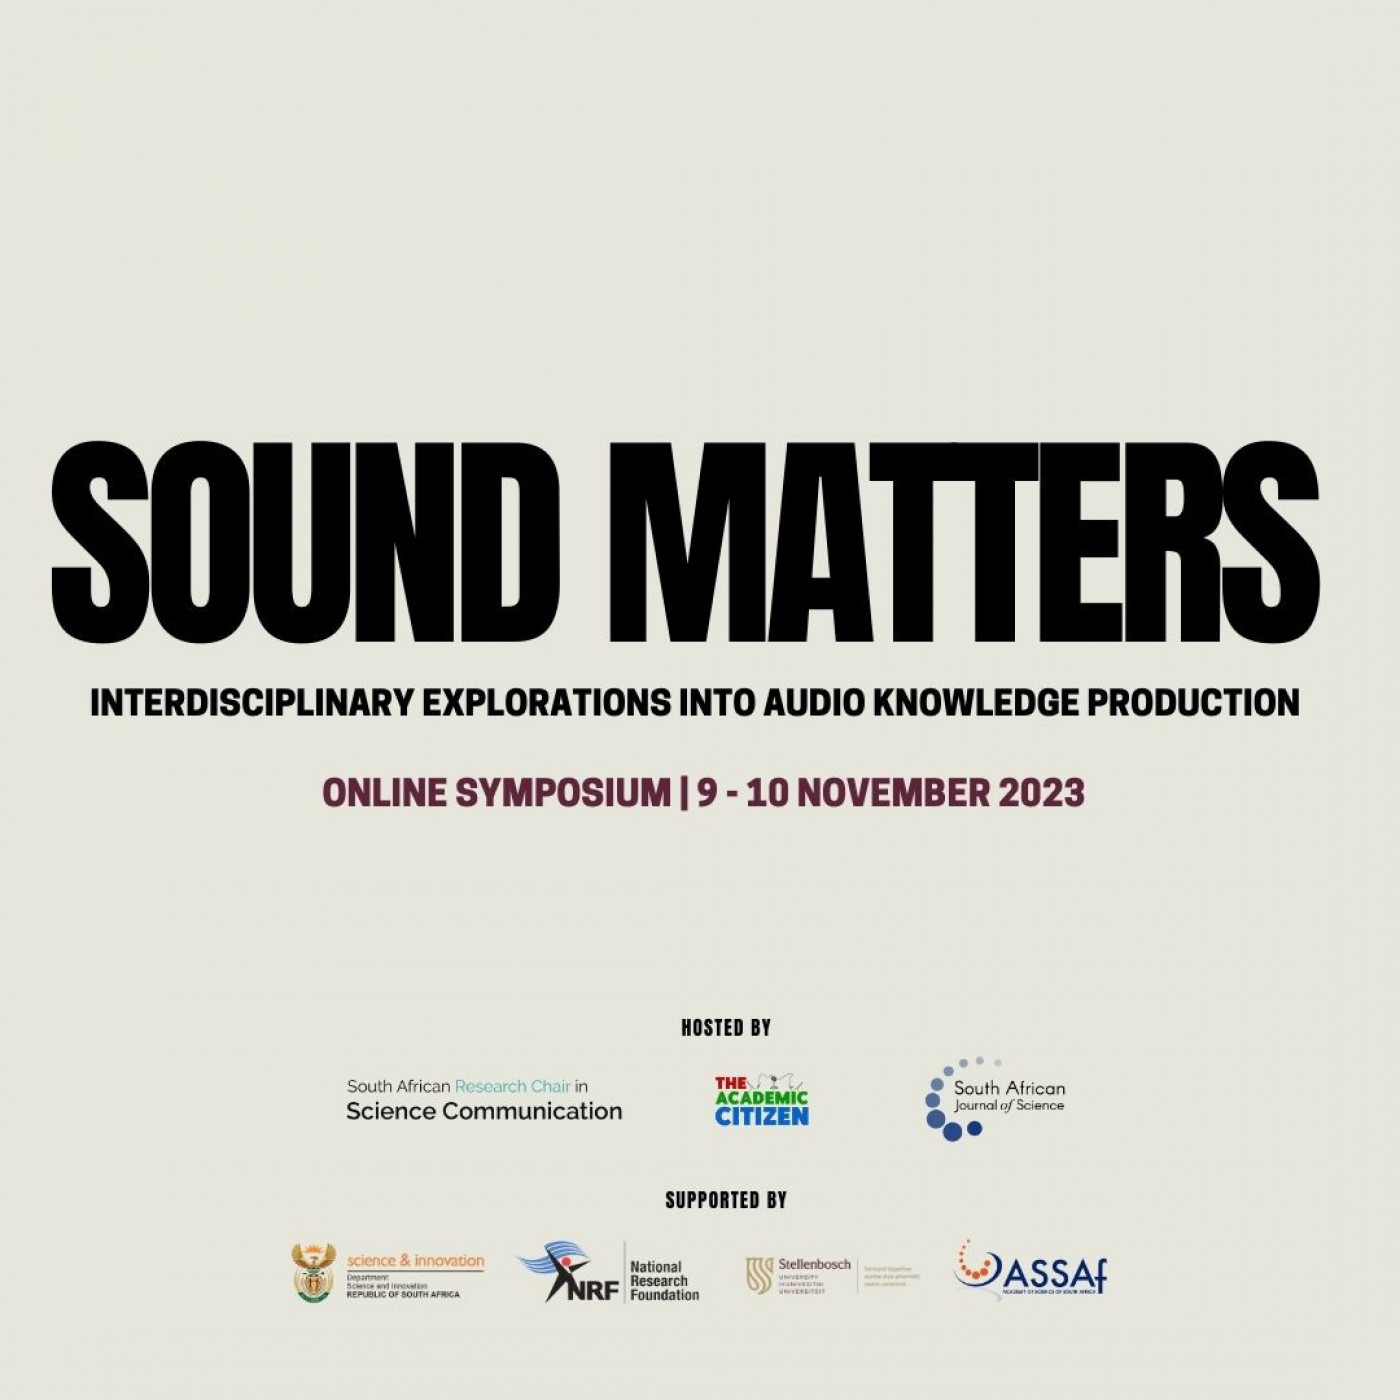 Sound Matters Virtual Symposium - Call for Participation